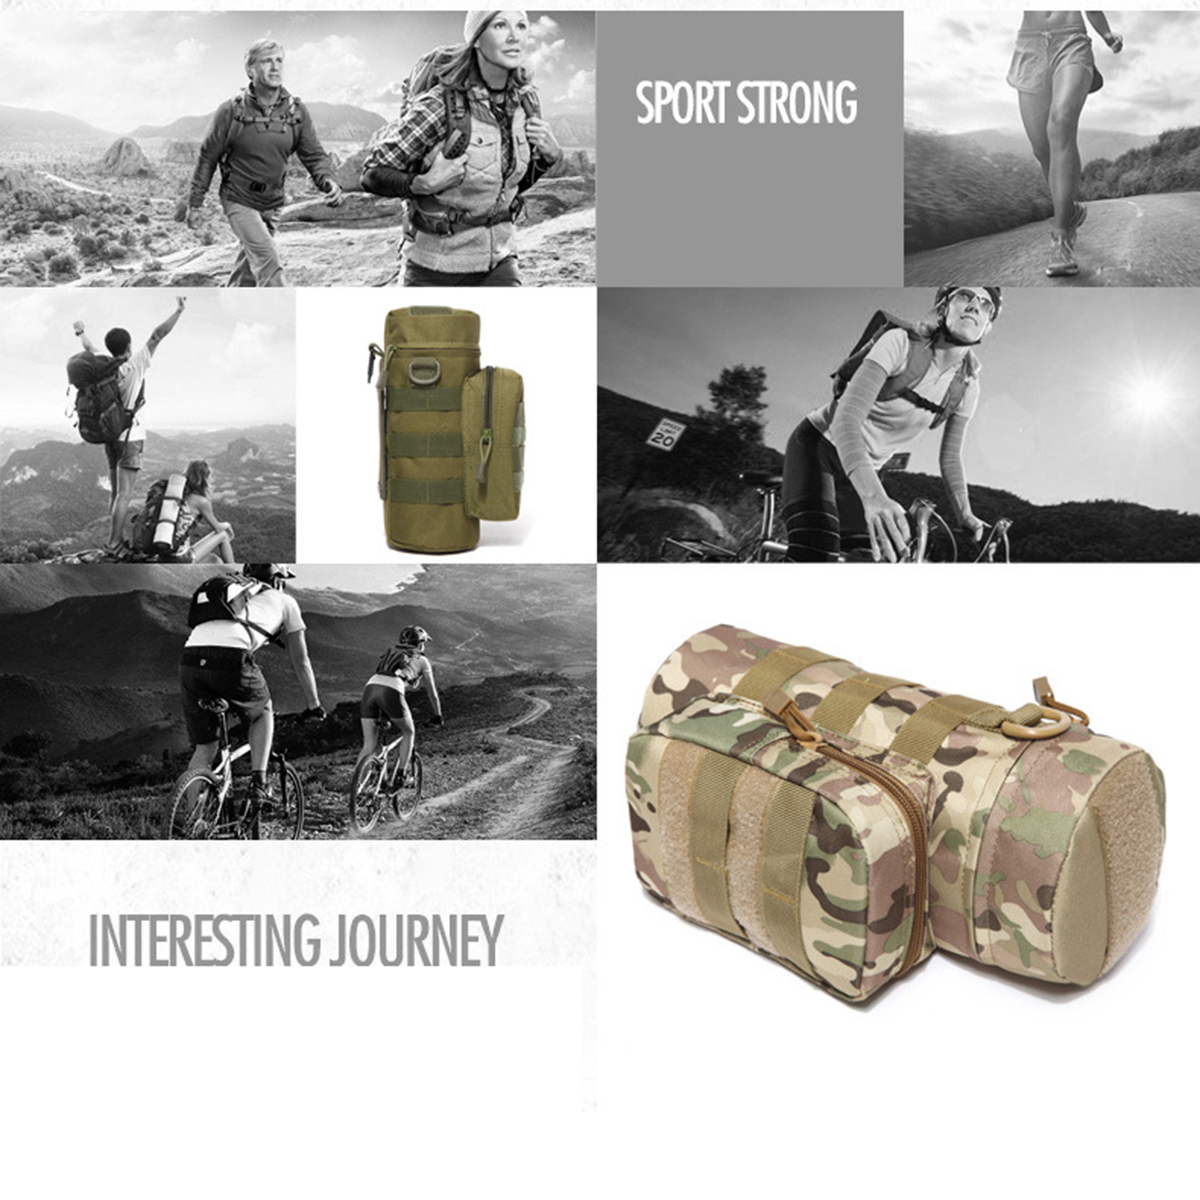 Multifunctional-Water-Bottle-Bag-Outdoor-Tactical-Bag-Sports-Hiking-Climbing-Package-Kettle-Bag-1484982-9